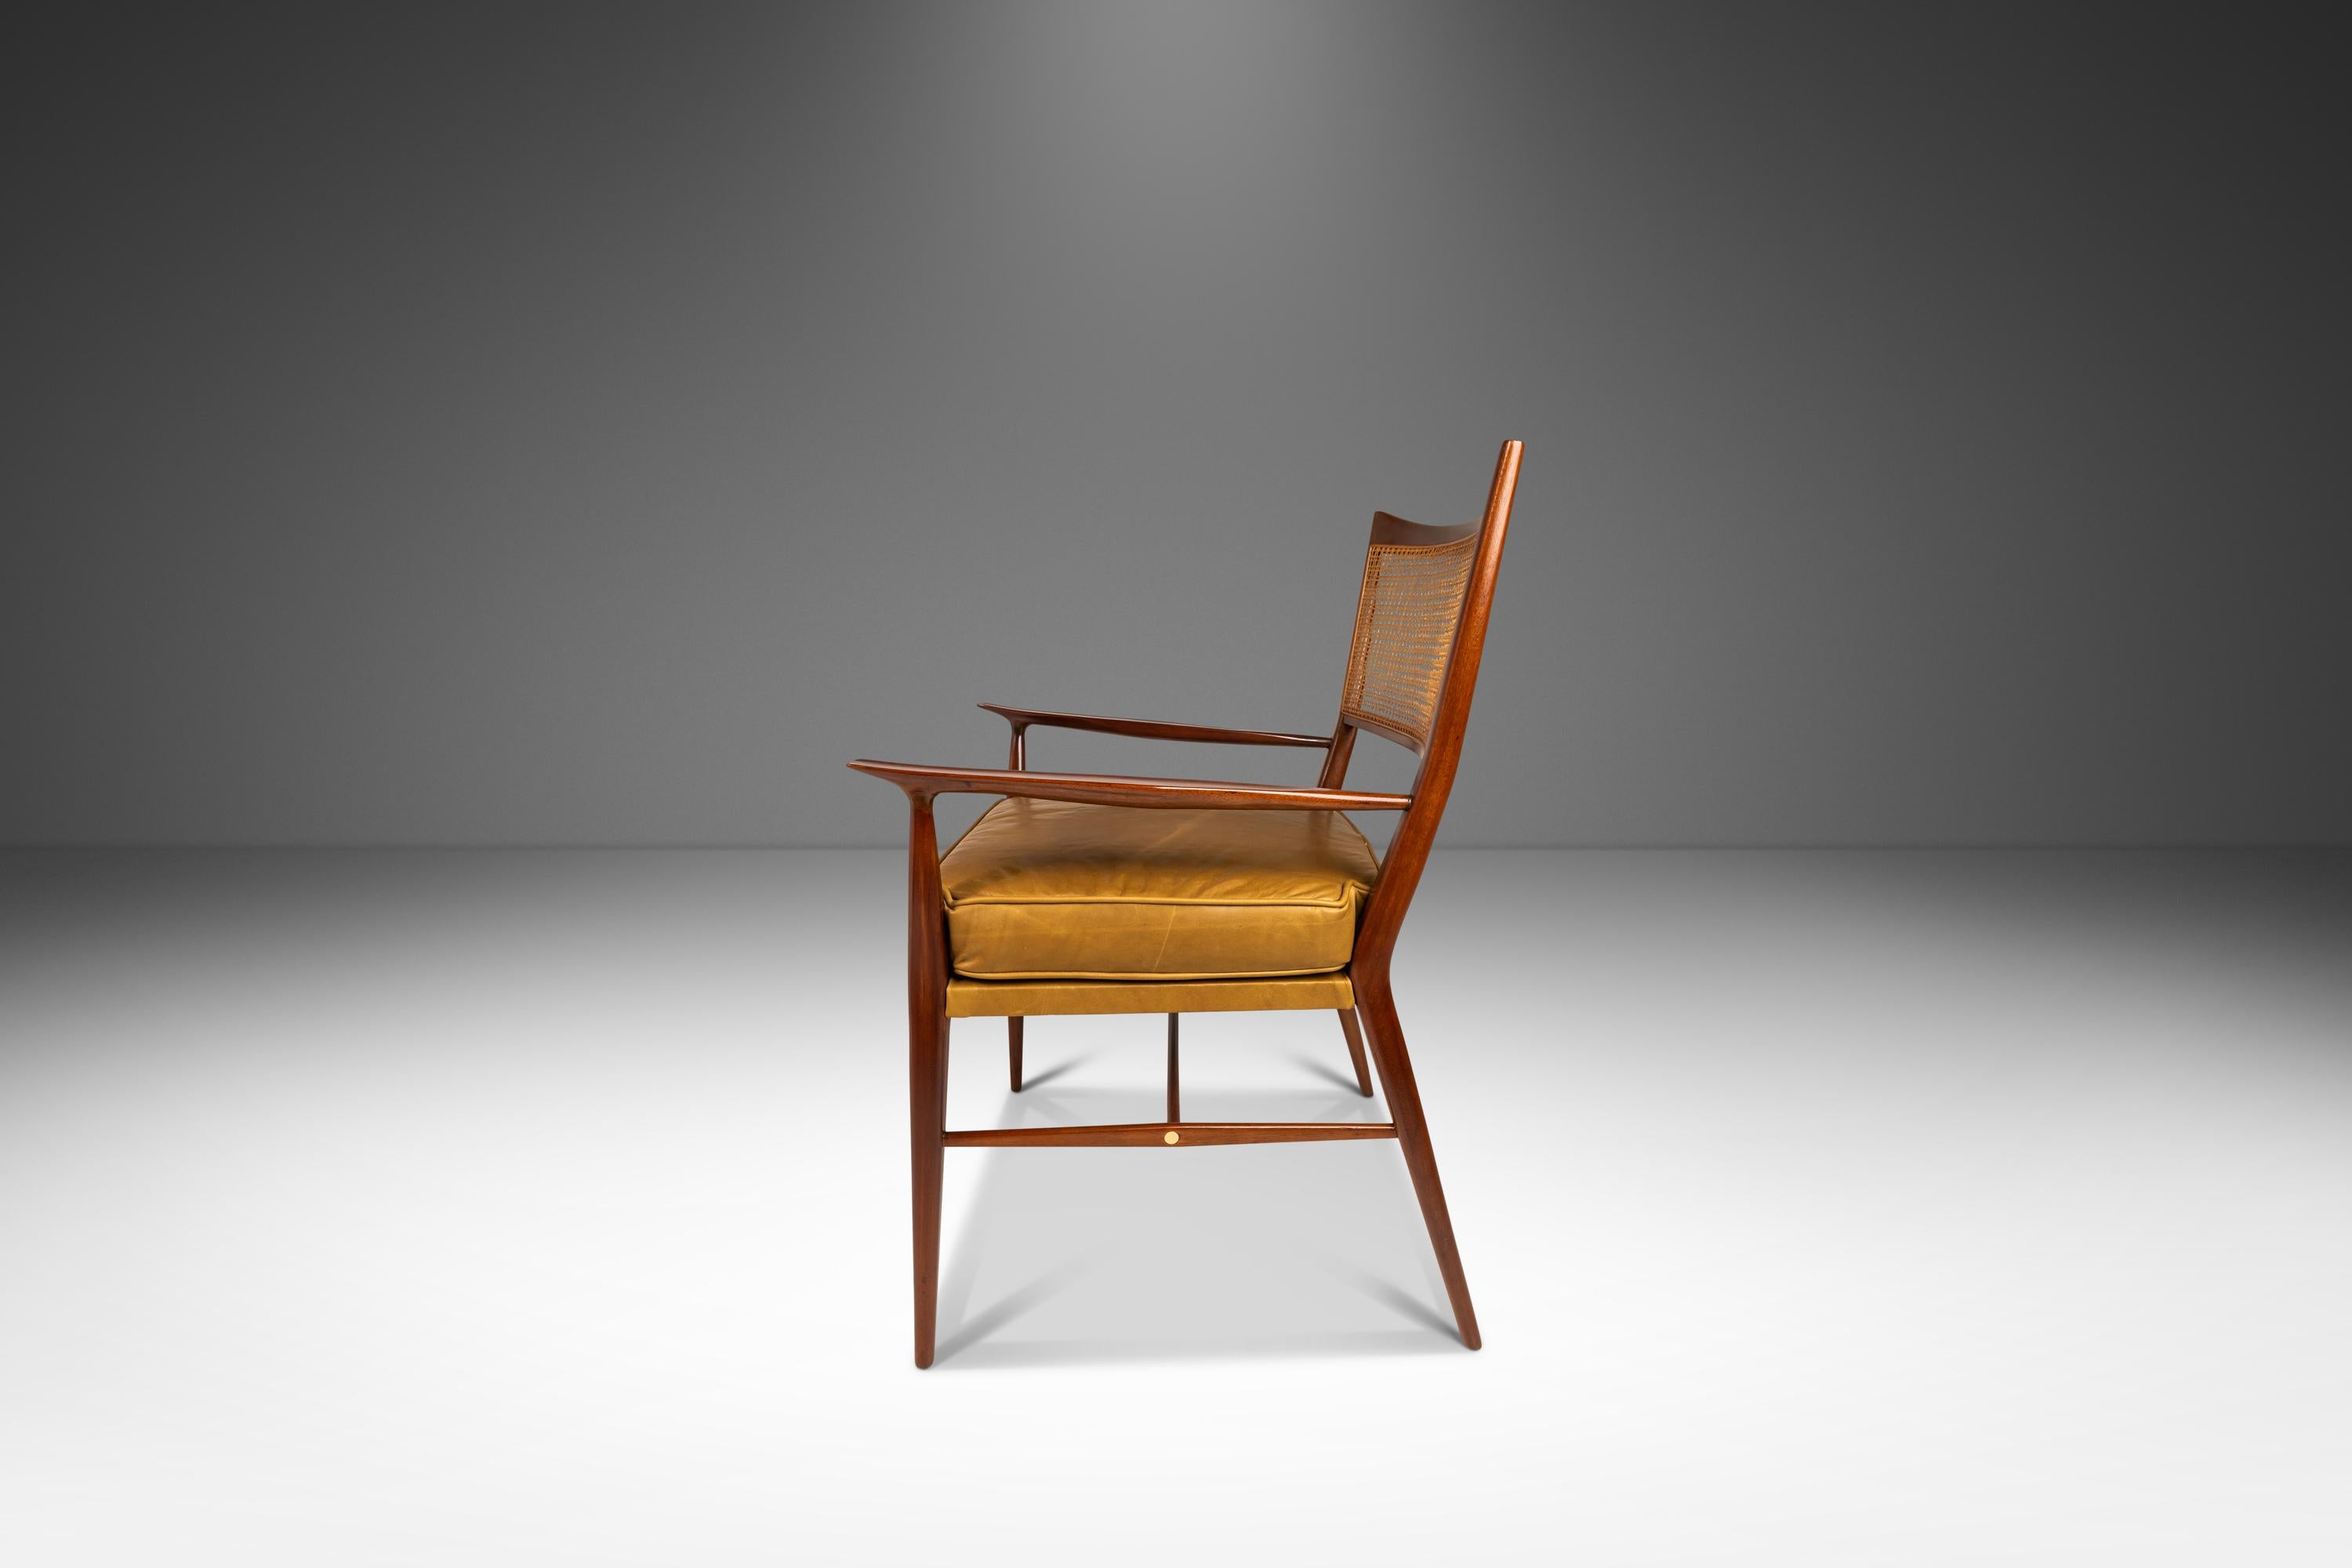 Brass MCM Model 7001 Chair in Walnut by Paul McCobb for Directional, USA, c. 1950s For Sale